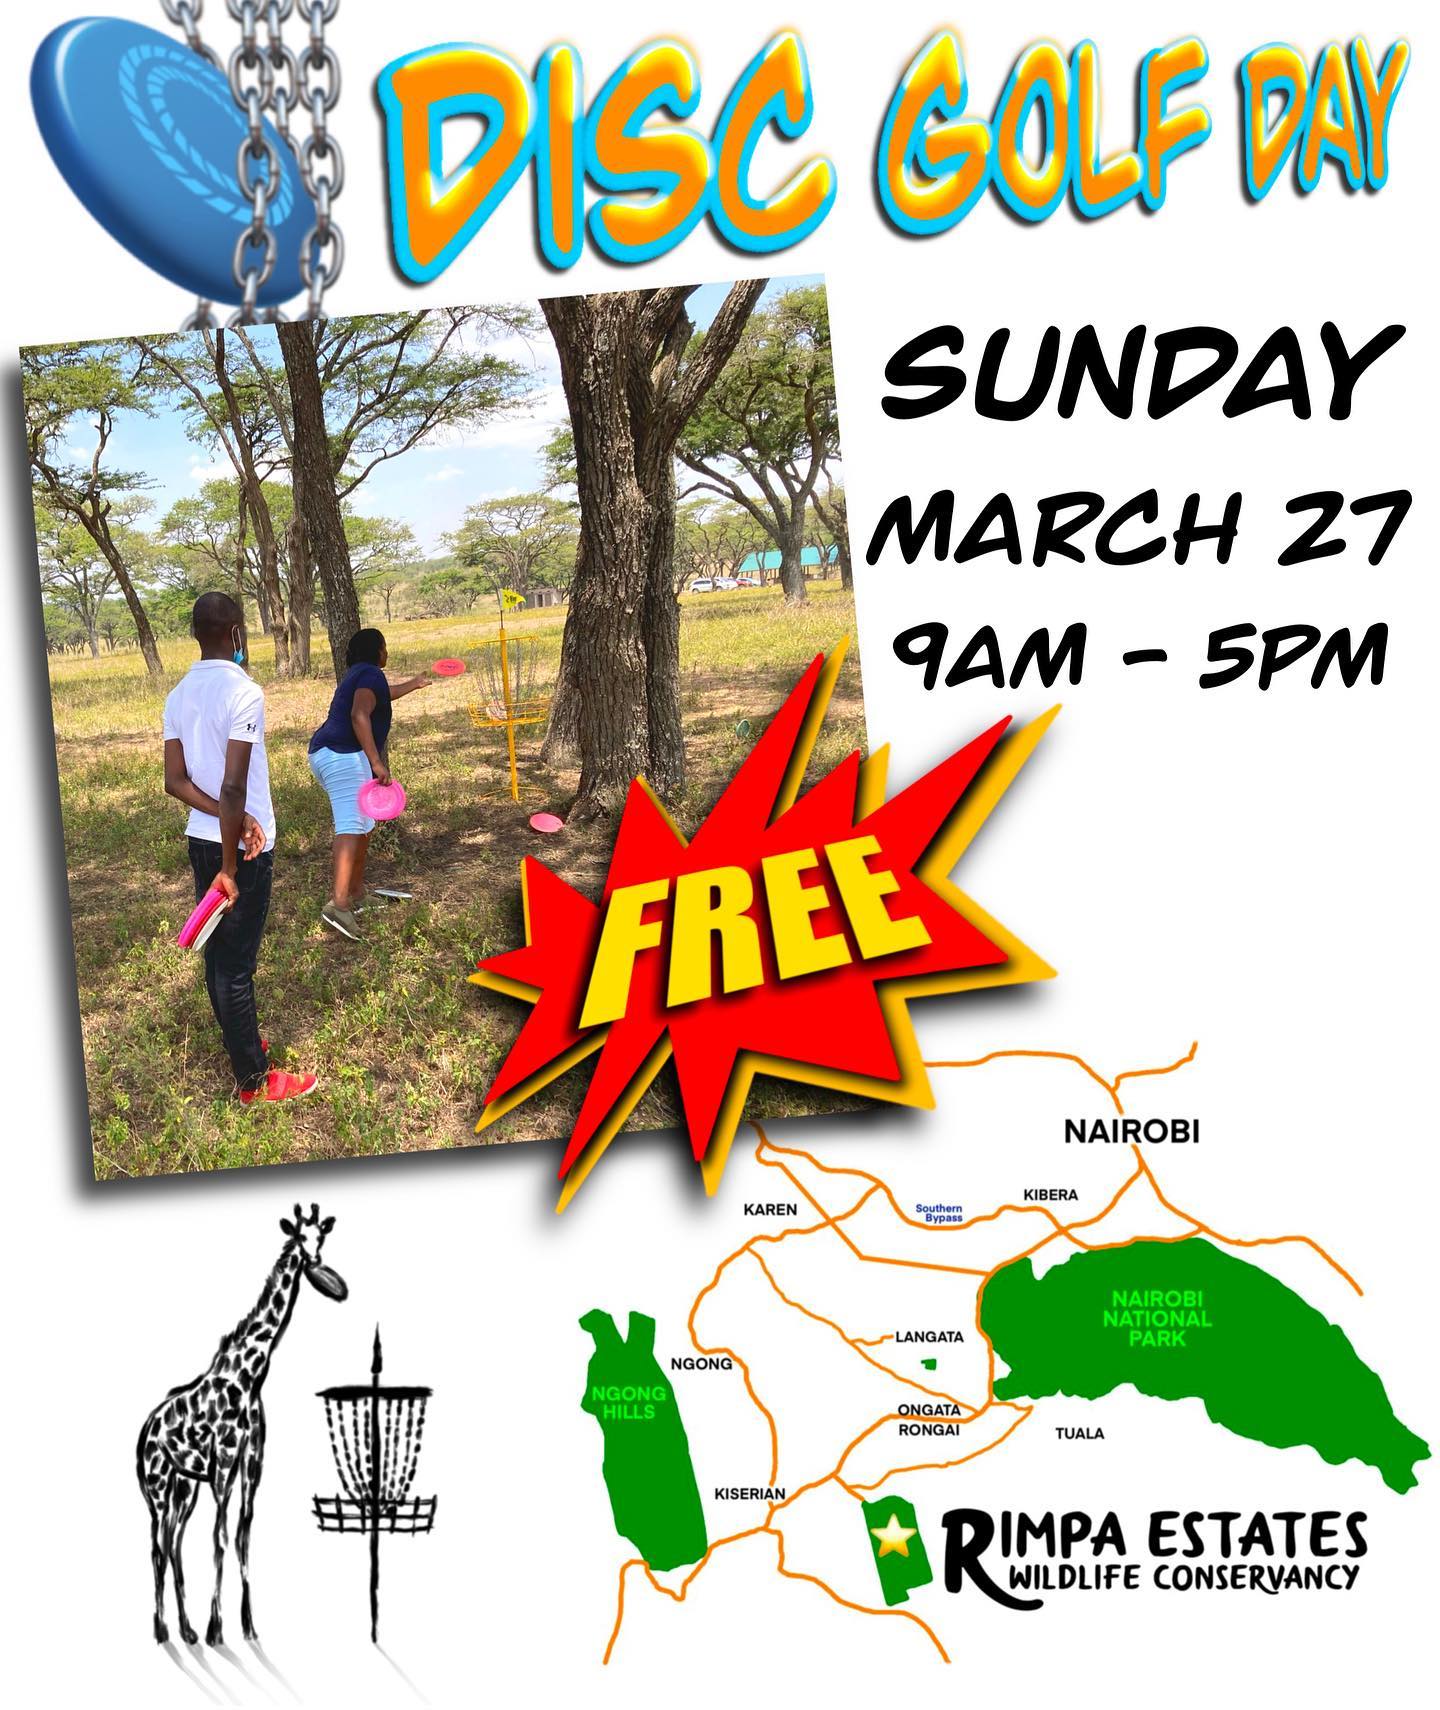 The next FREE Disc Golf Day at The Reserve at Rimpa Estates Wildlife Conservancy will take place on Sunday, March 27 from 9am to 5pm. 

You can come and play for as little or as long as you like. Bring some food, along with your family and friends, and have a picnic while you’re here.

I will also be filming footage for a funny disc golf themed music video that day. All guests are welcome to participate.

#kenya #discgolf #discgolfday #nairobidaytrips #kenyasports #discgolflife #discgolfeveryday #kenyawildlife #wildlifeconservation #kenyafamily #kenyafamily #nairobigetaway